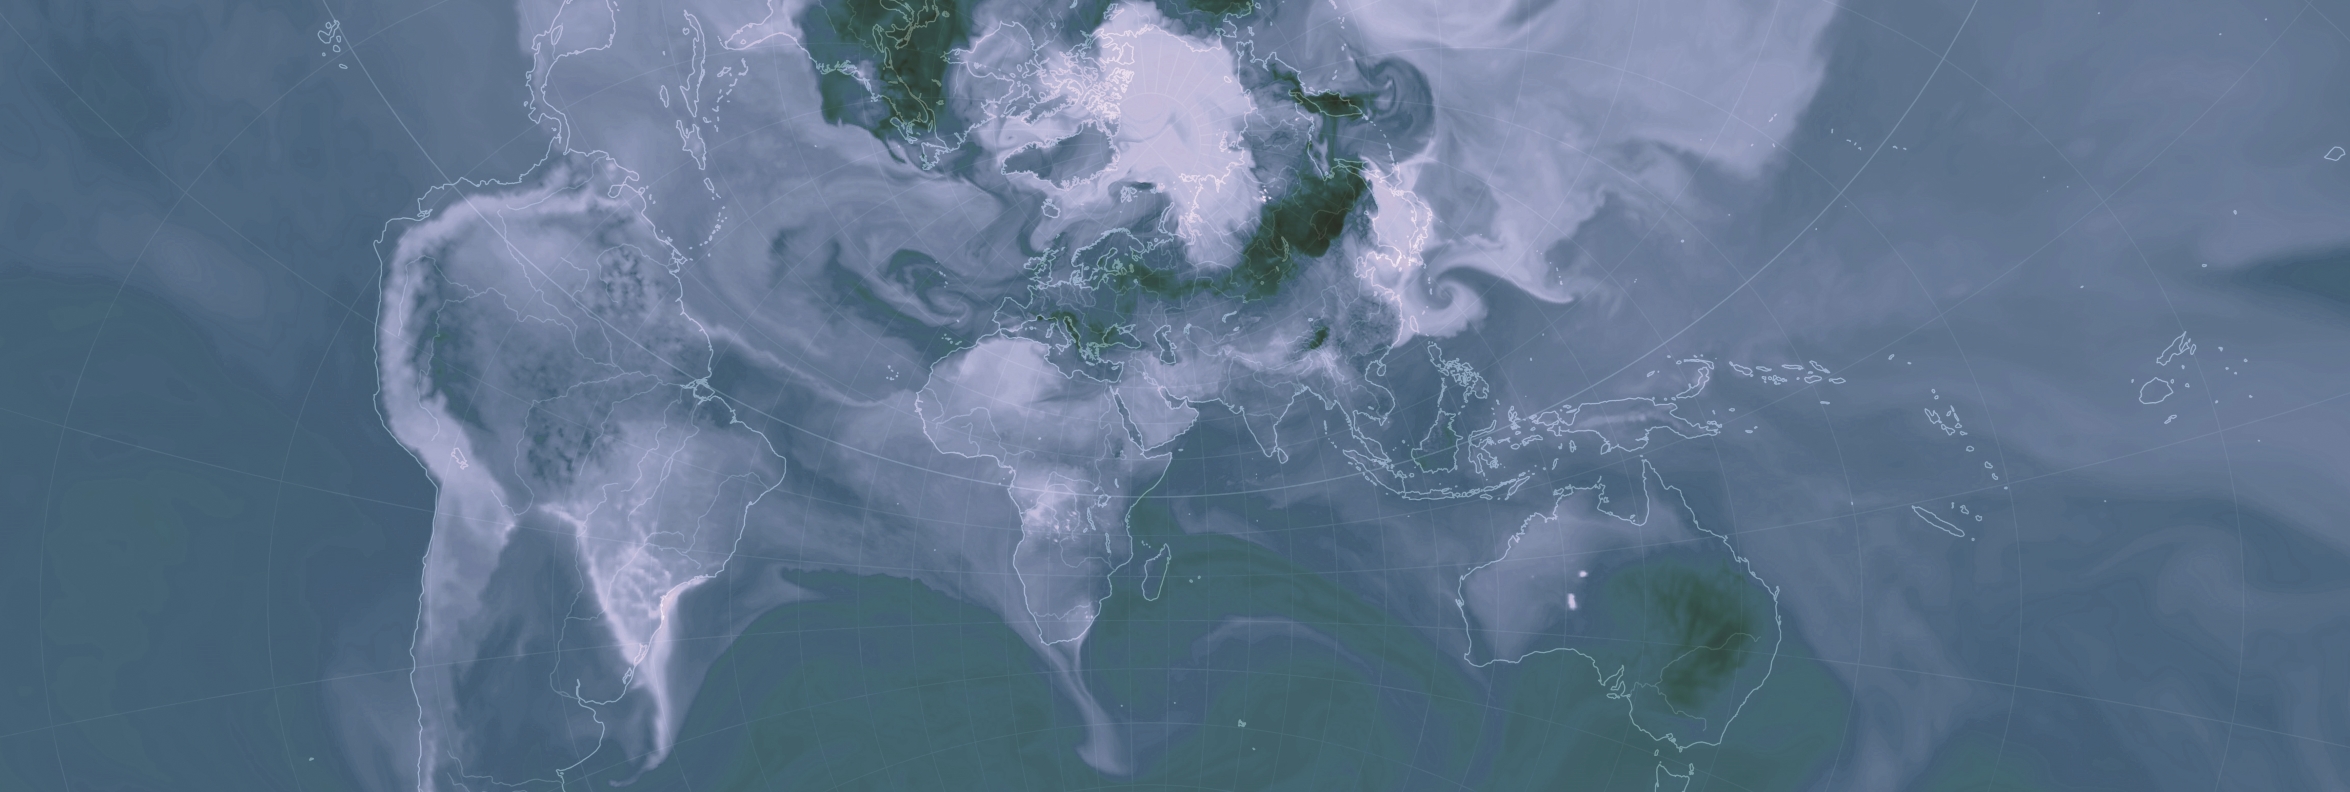 Visualisation of global carbon dioxide surface concentration by Cameron Beccario, earth.nullschool.net, using GEOS-5 data provided by the Global Modeling and Assimilation Office (GMAO) at NASA Goddard Space Flight Center.